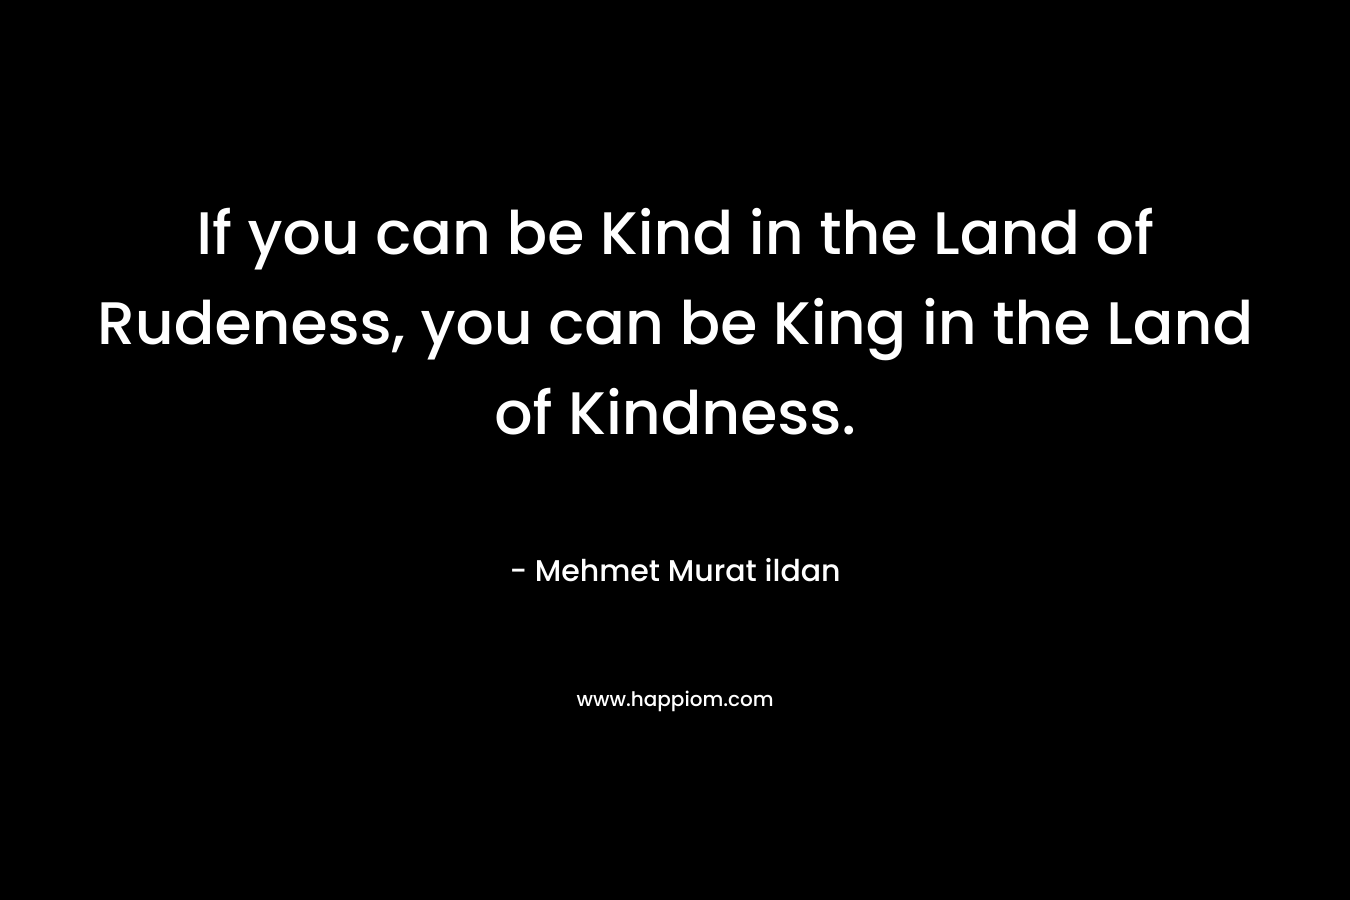 If you can be Kind in the Land of Rudeness, you can be King in the Land of Kindness.